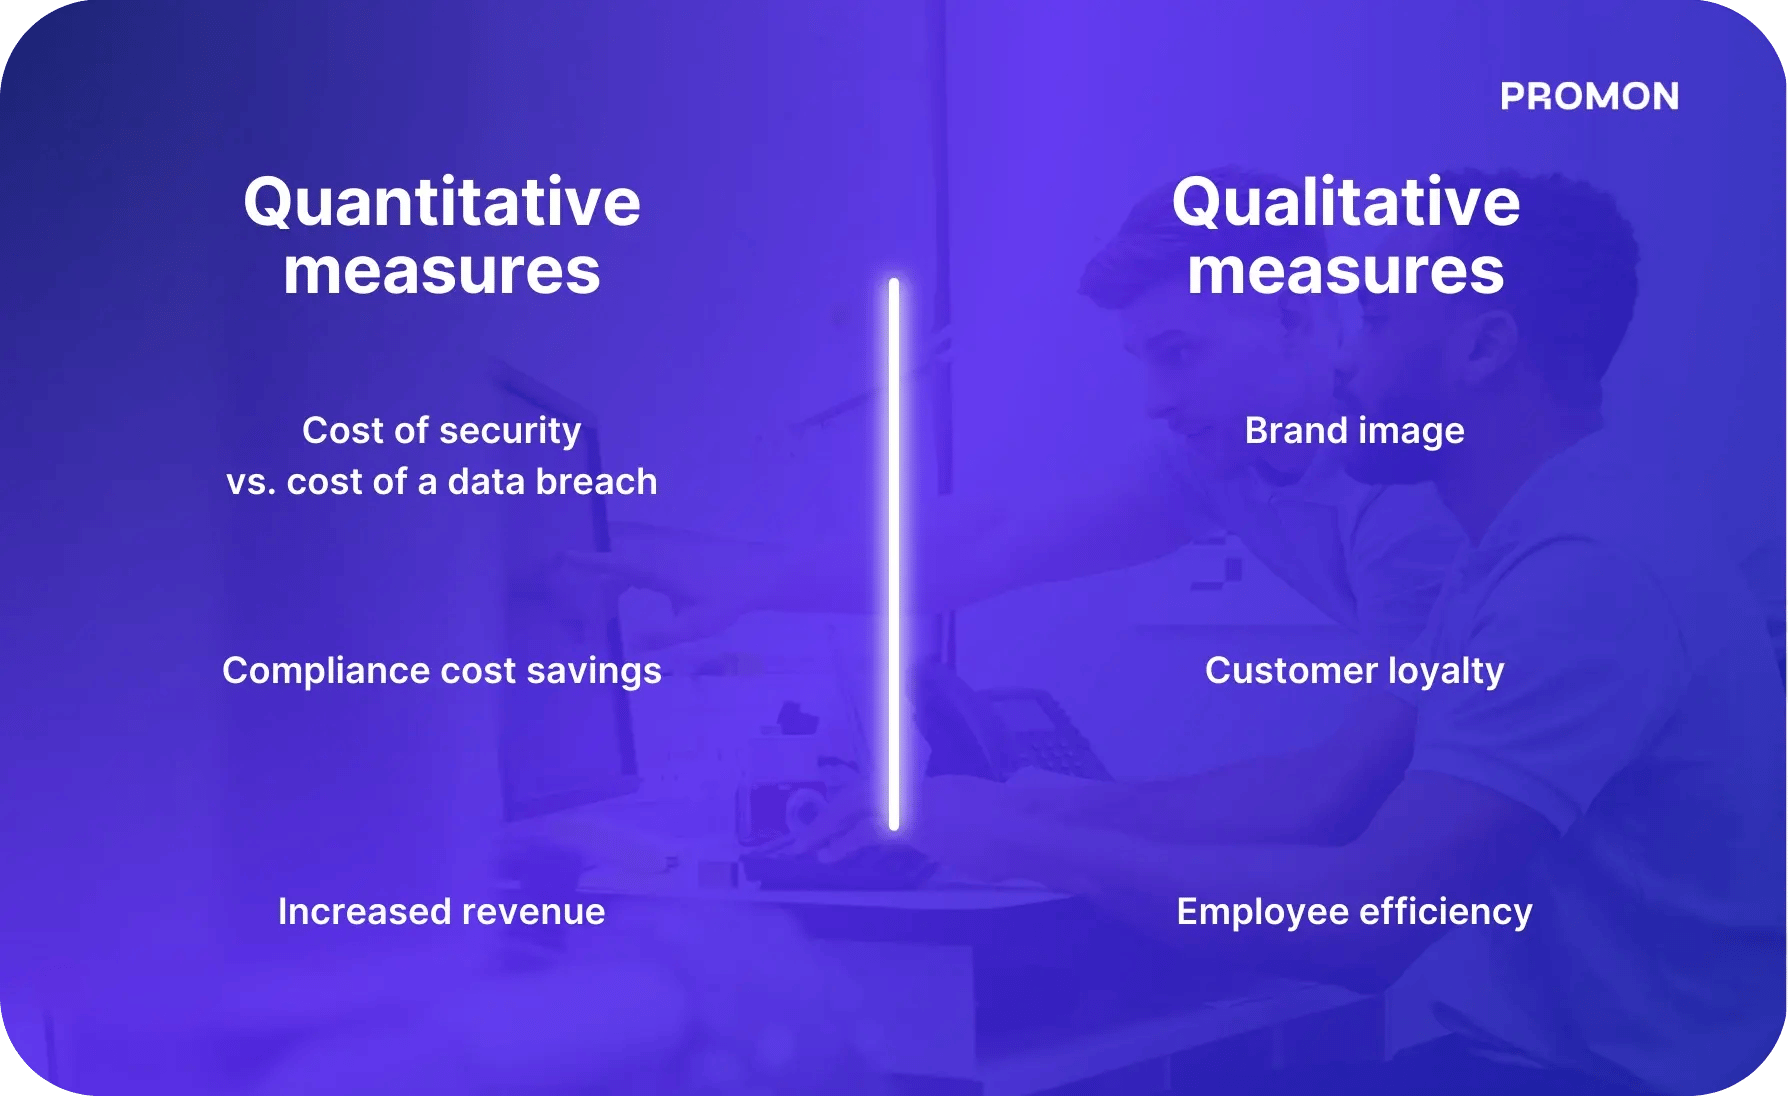 A table showing quantitative vs. qualitative measures for cybersecurity ROI.